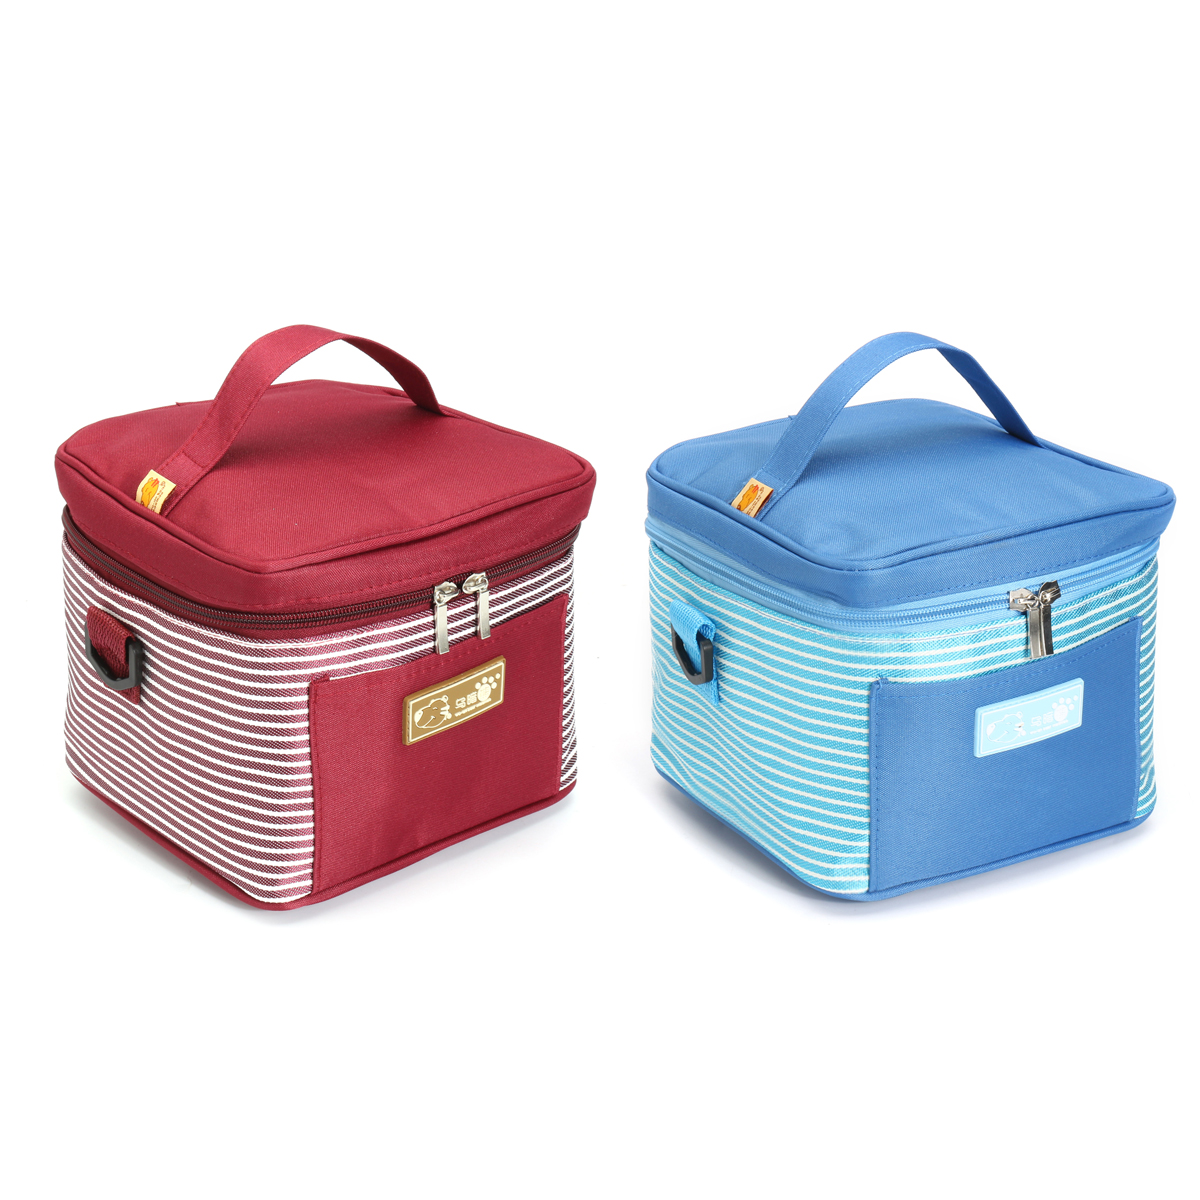 

IPRee Portable Travel Insulated Thermal Cooler Lunch Box Carry Tote Picnic Storage Bag